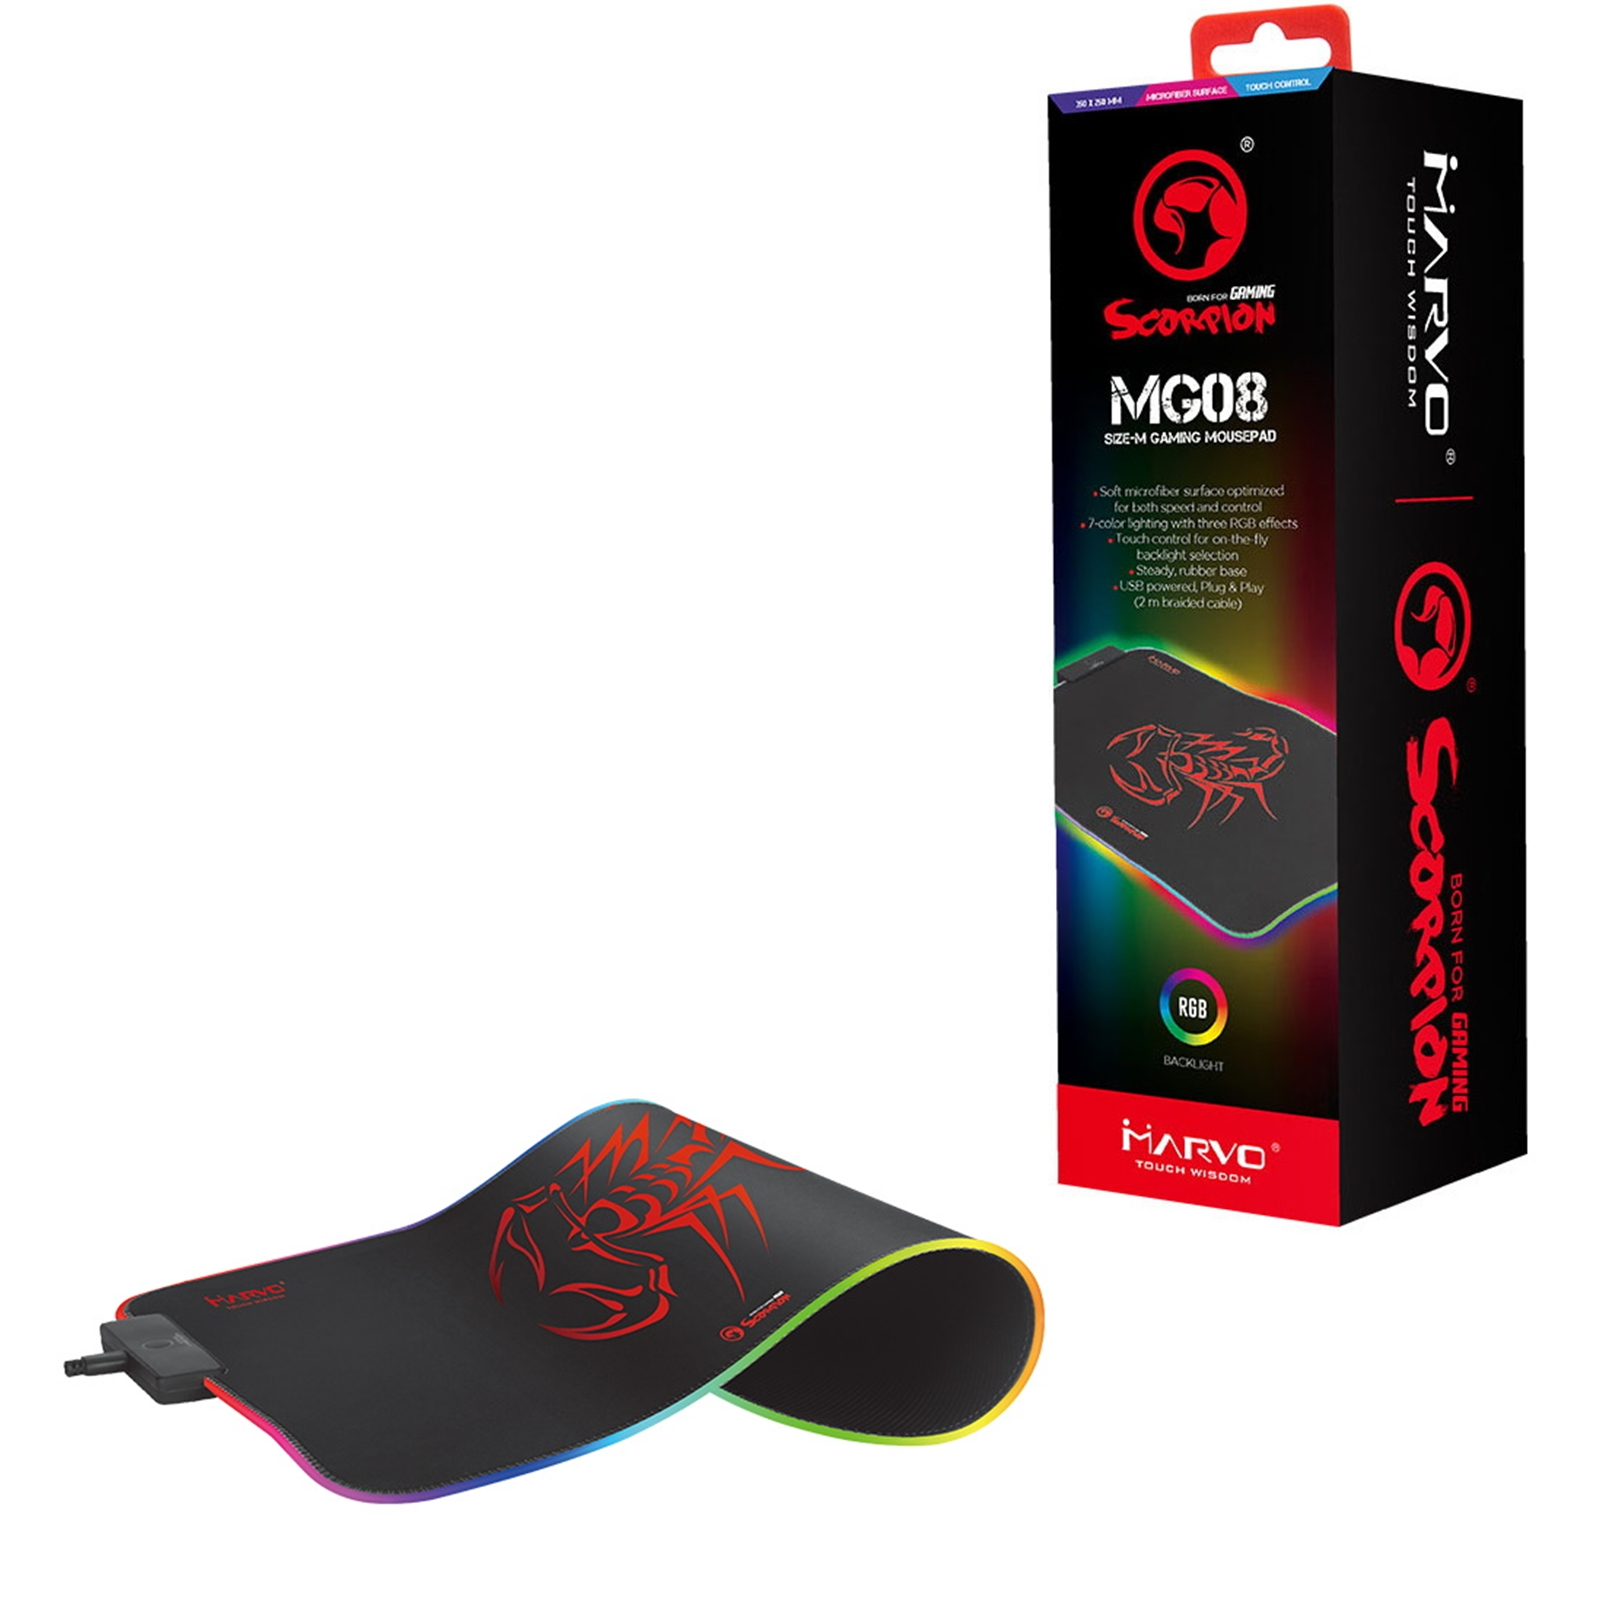 MG08 AIT MG08 Gaming Mouse Pad, 7 Colour LED with 3 RGB Effects, Medium 350x250x4mm, USB Connection, Soft Microfiber Surface for Speed and Control with Non-Slip Rubber Base and Stitched Edges, Black